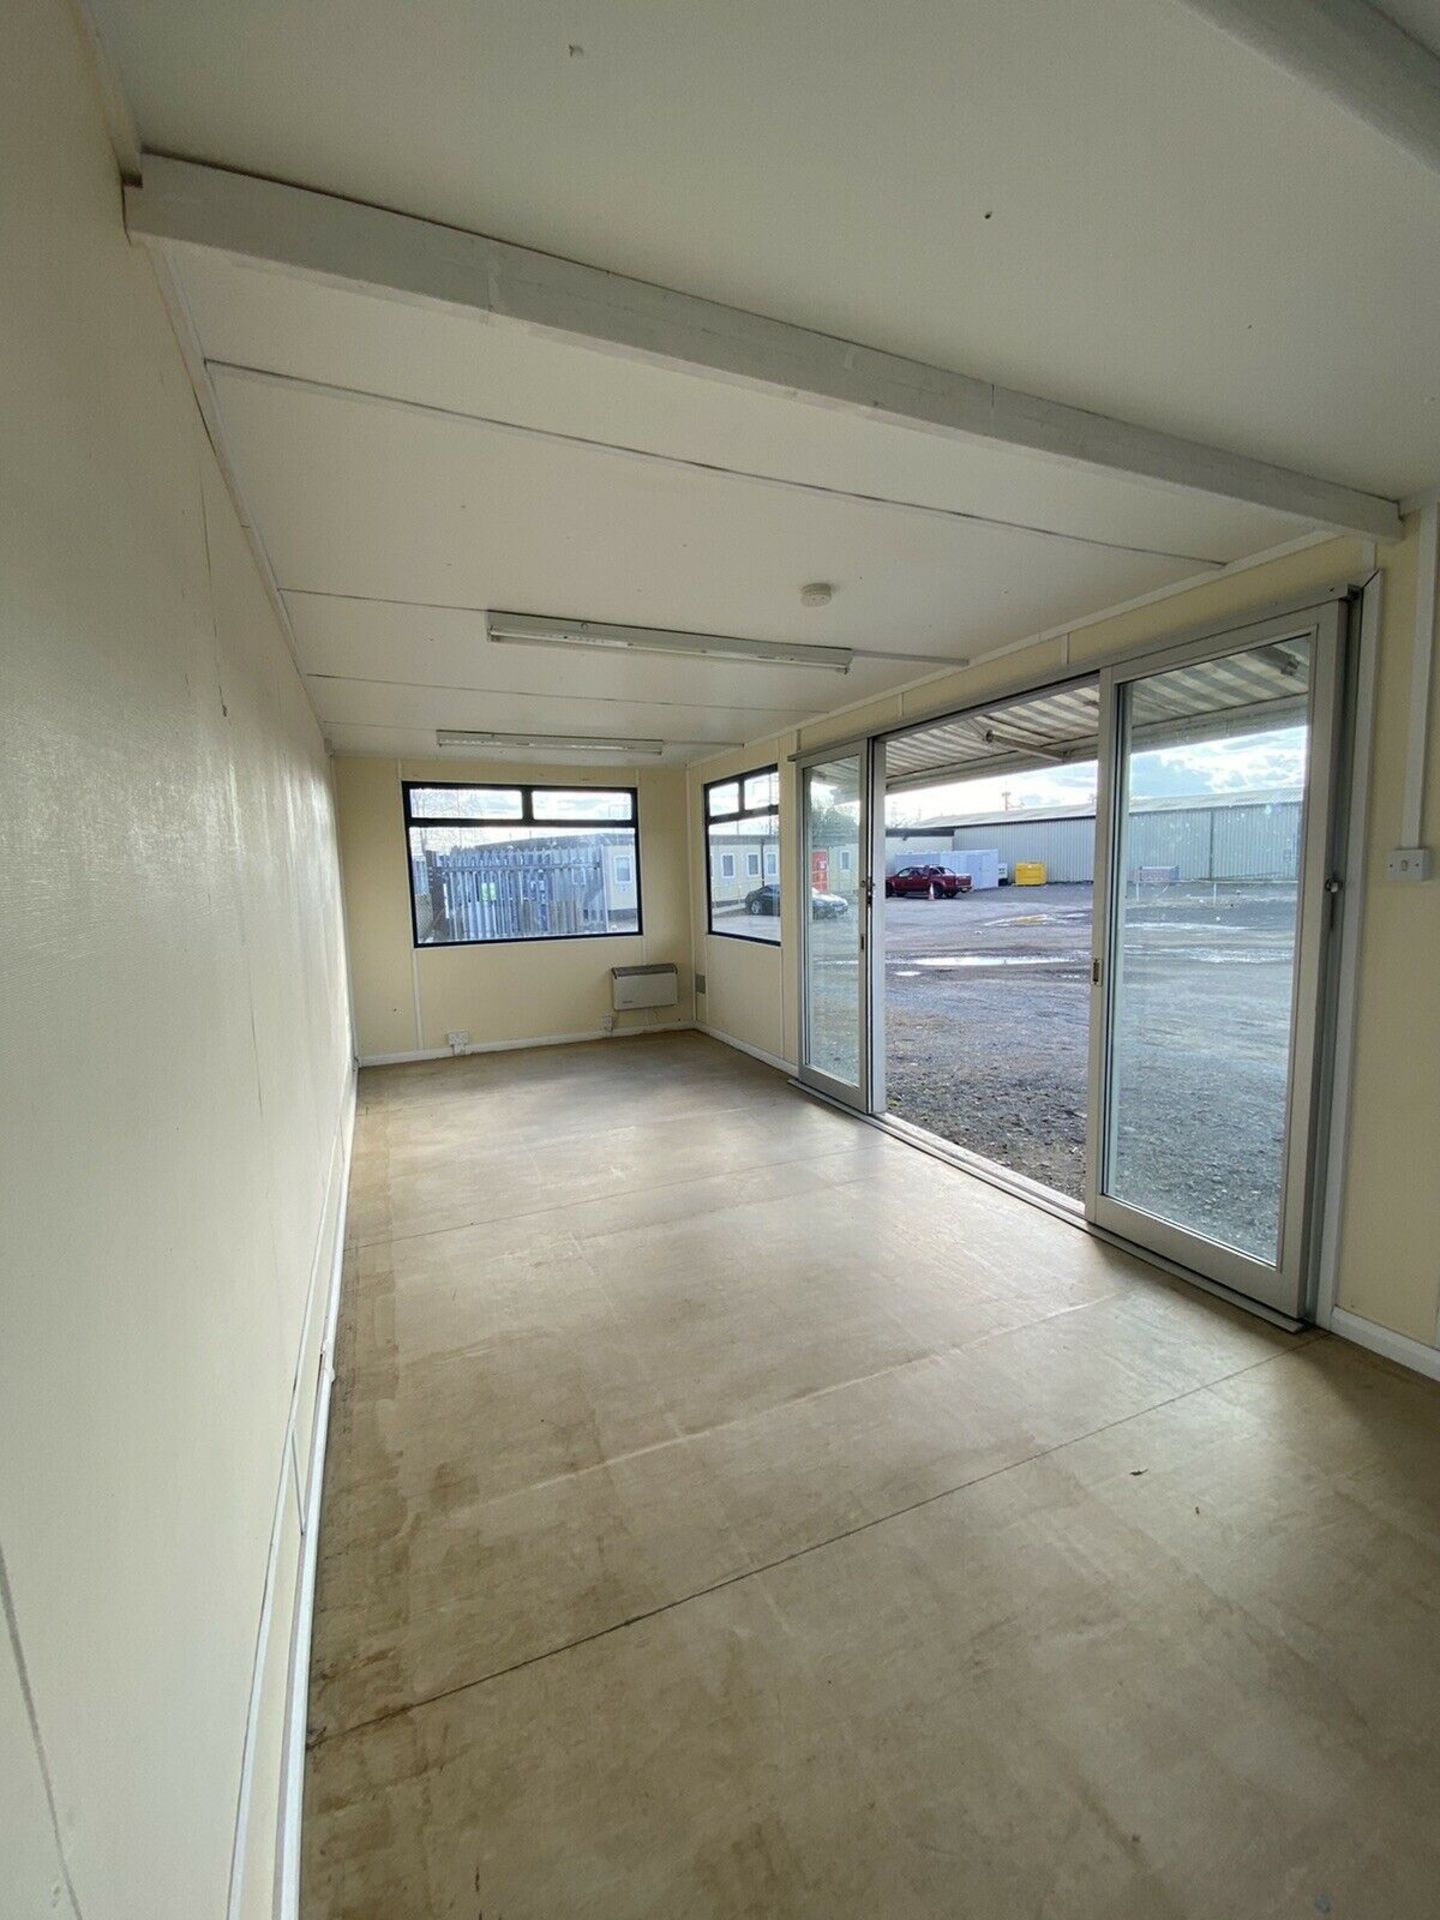 24ft Marketing Suite, Sales Centre Office - Image 12 of 12